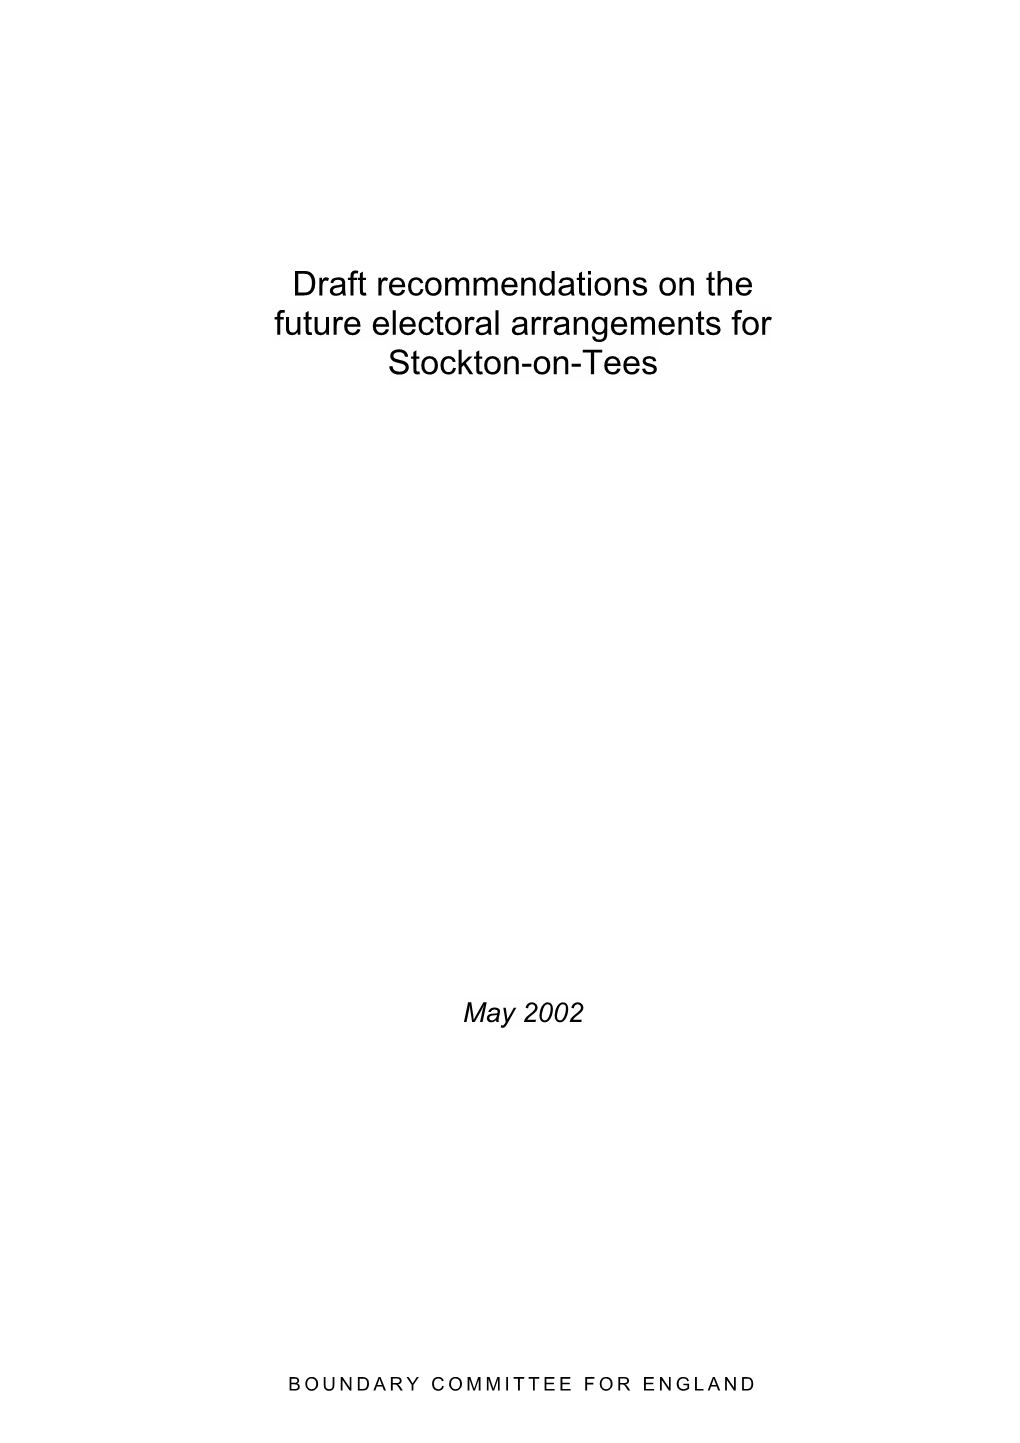 Draft Recommendations on the Future Electoral Arrangements for Stockton-On-Tees